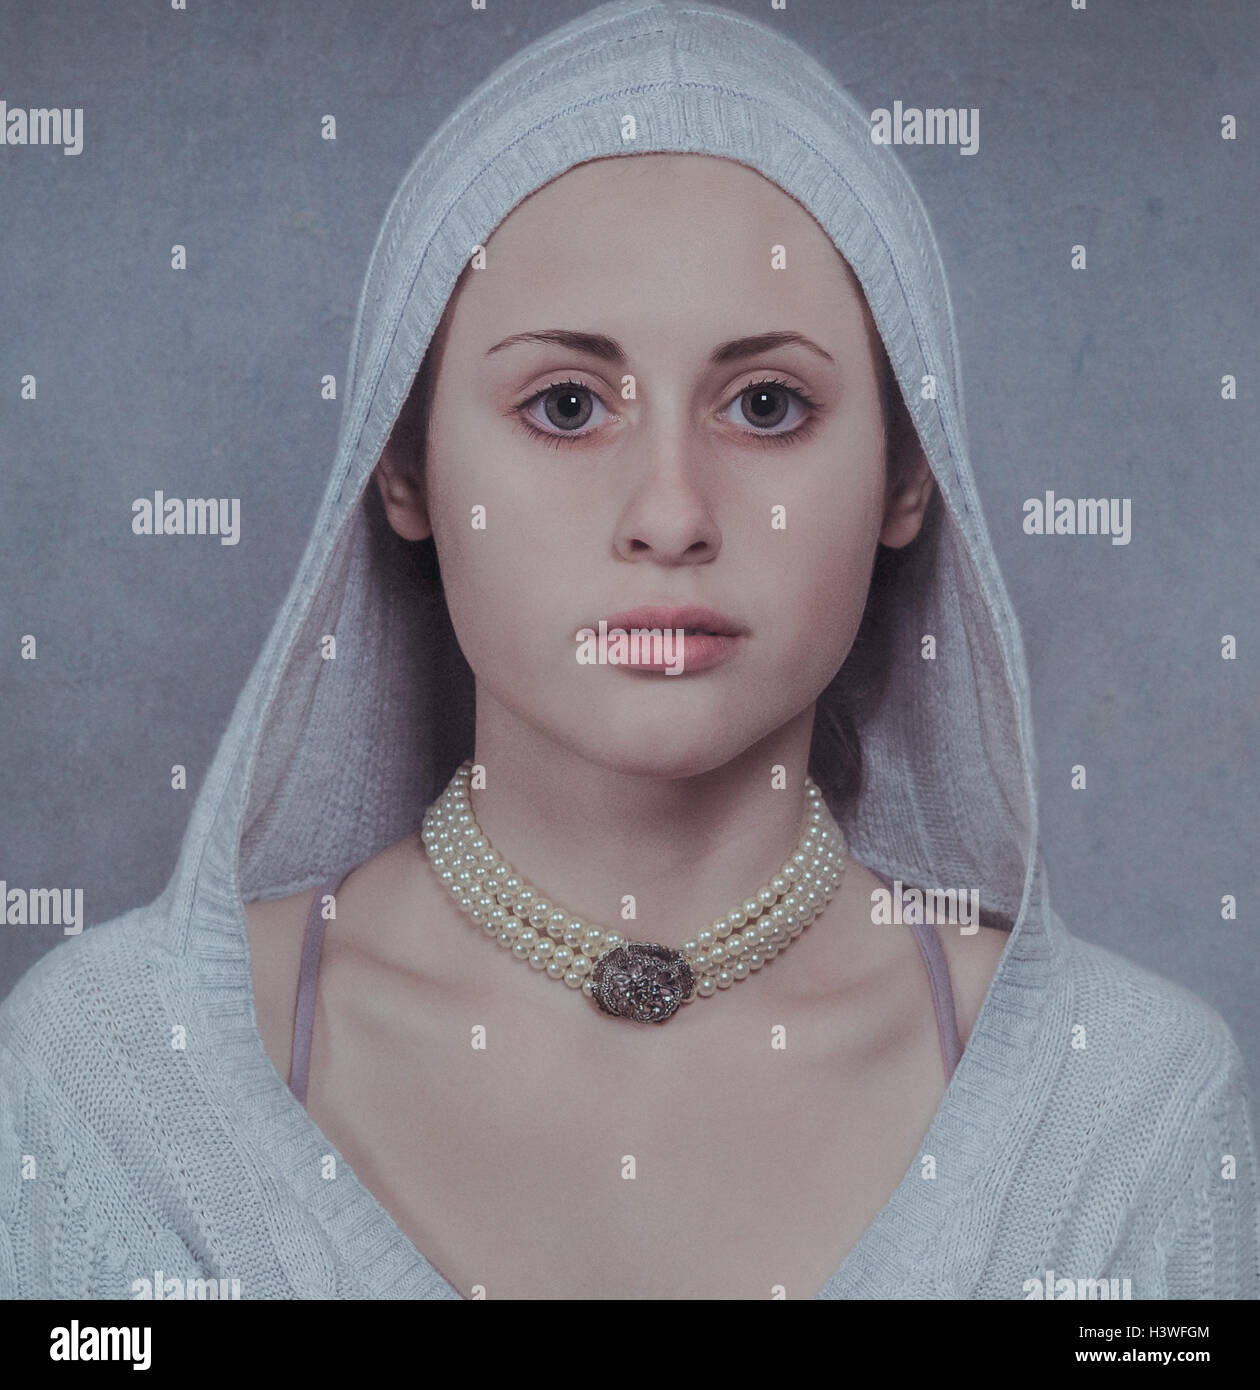 Portrait of a young girl wearing a pearl necklace Banque D'Images